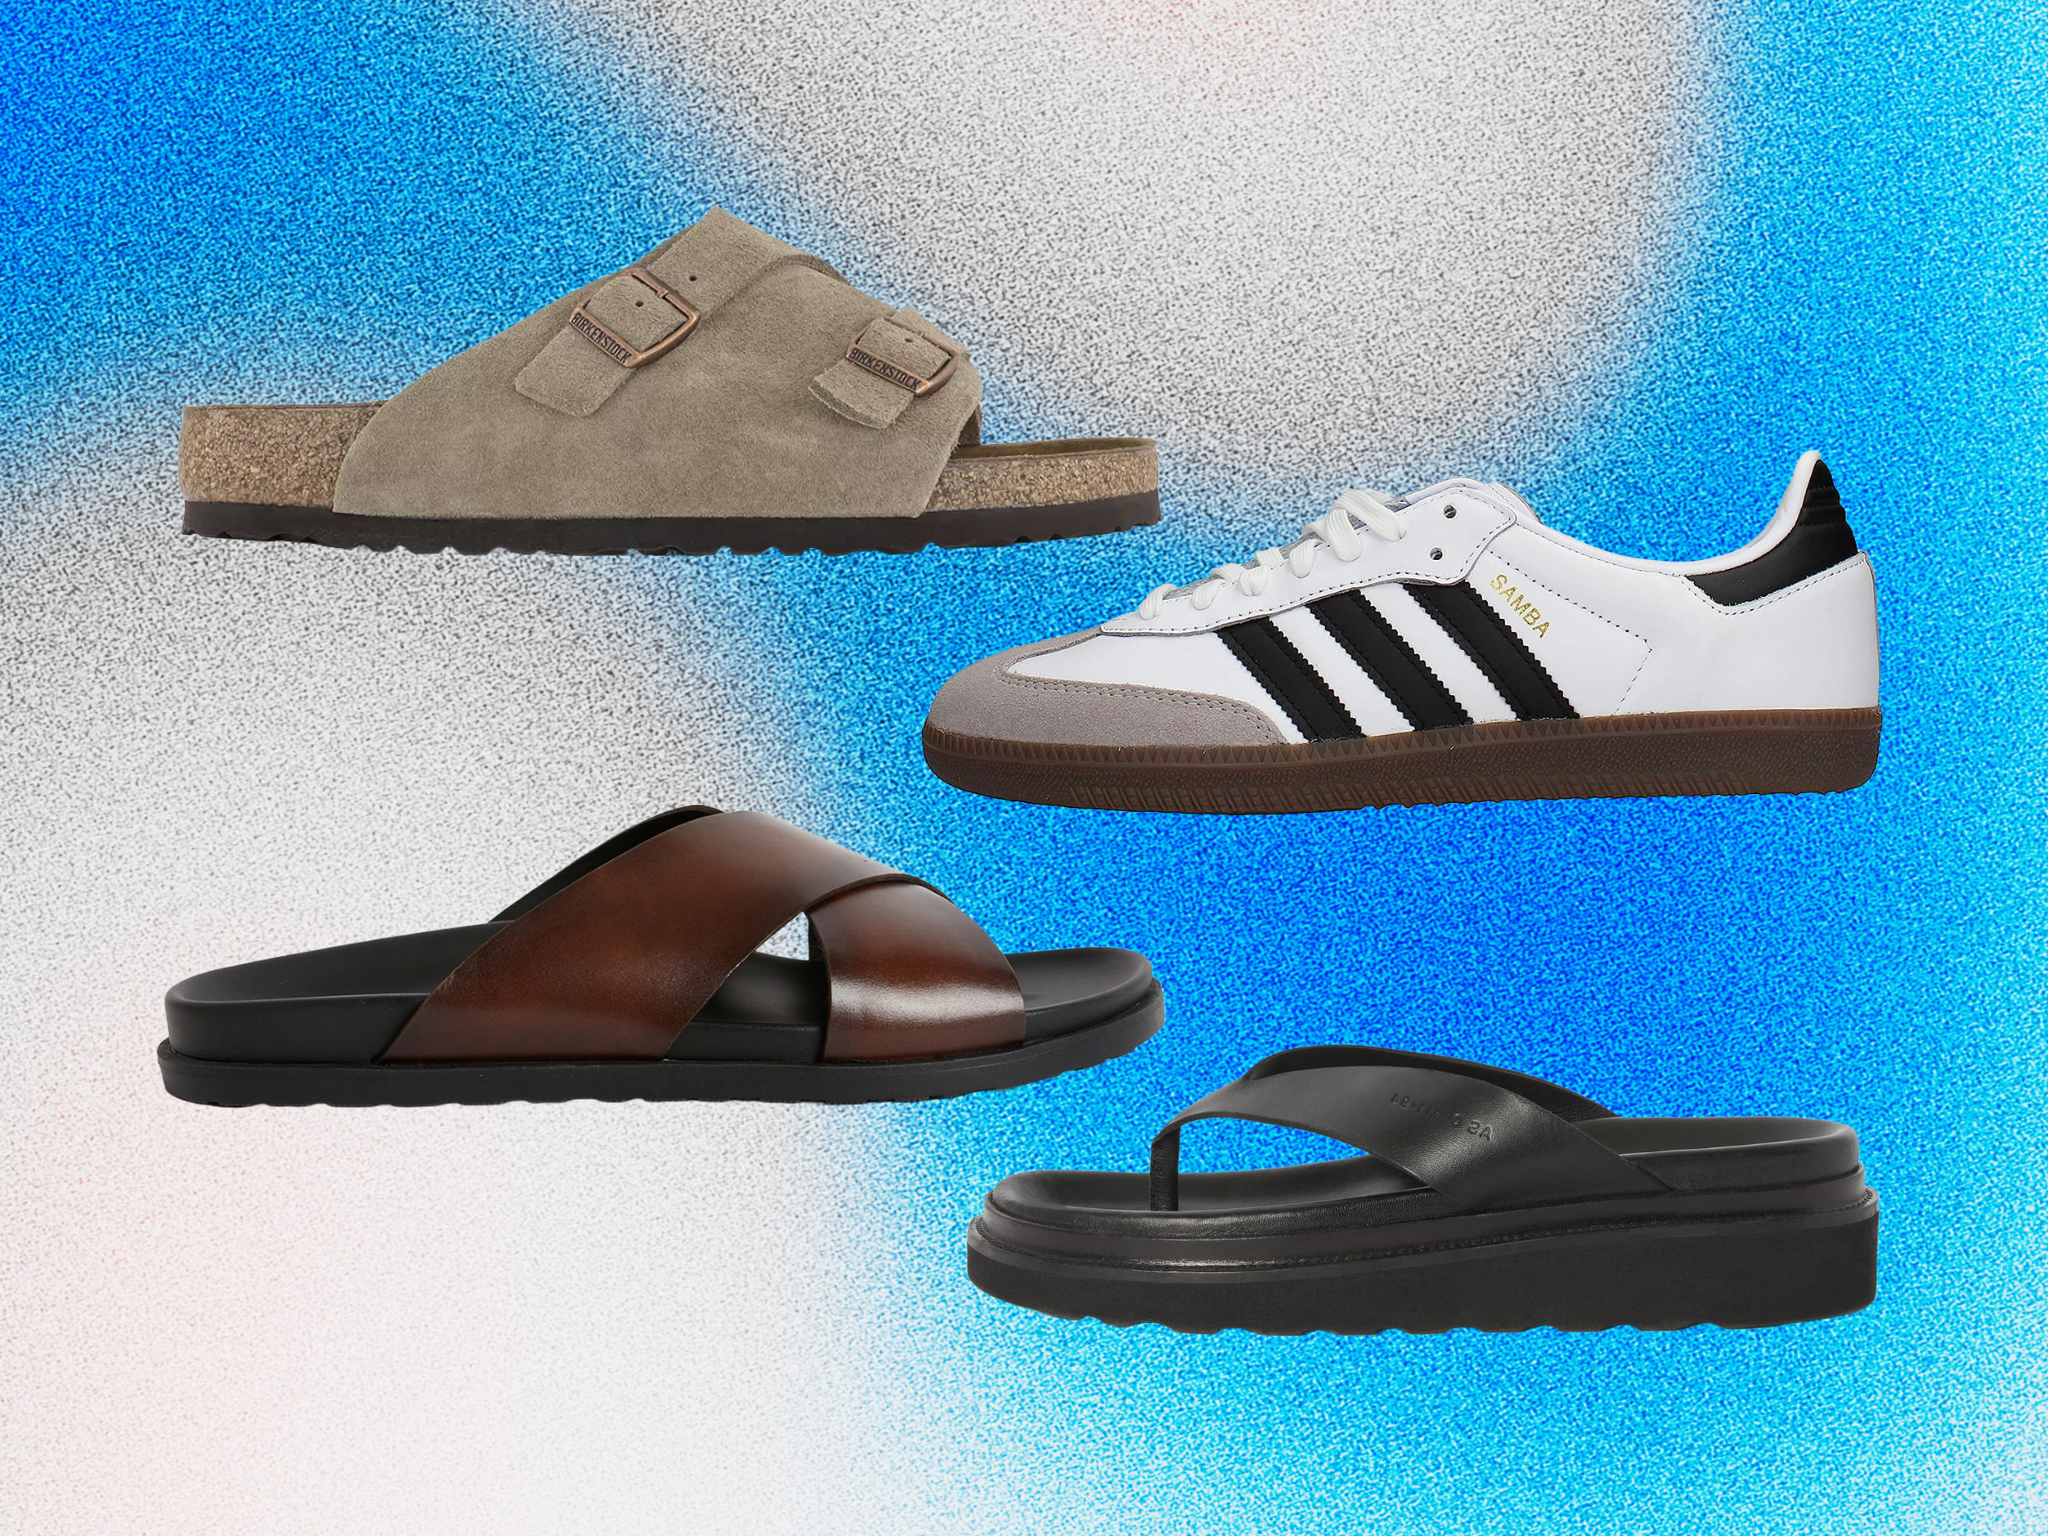 Best men’s summer shoes and sandals, for holidays, weddings and more